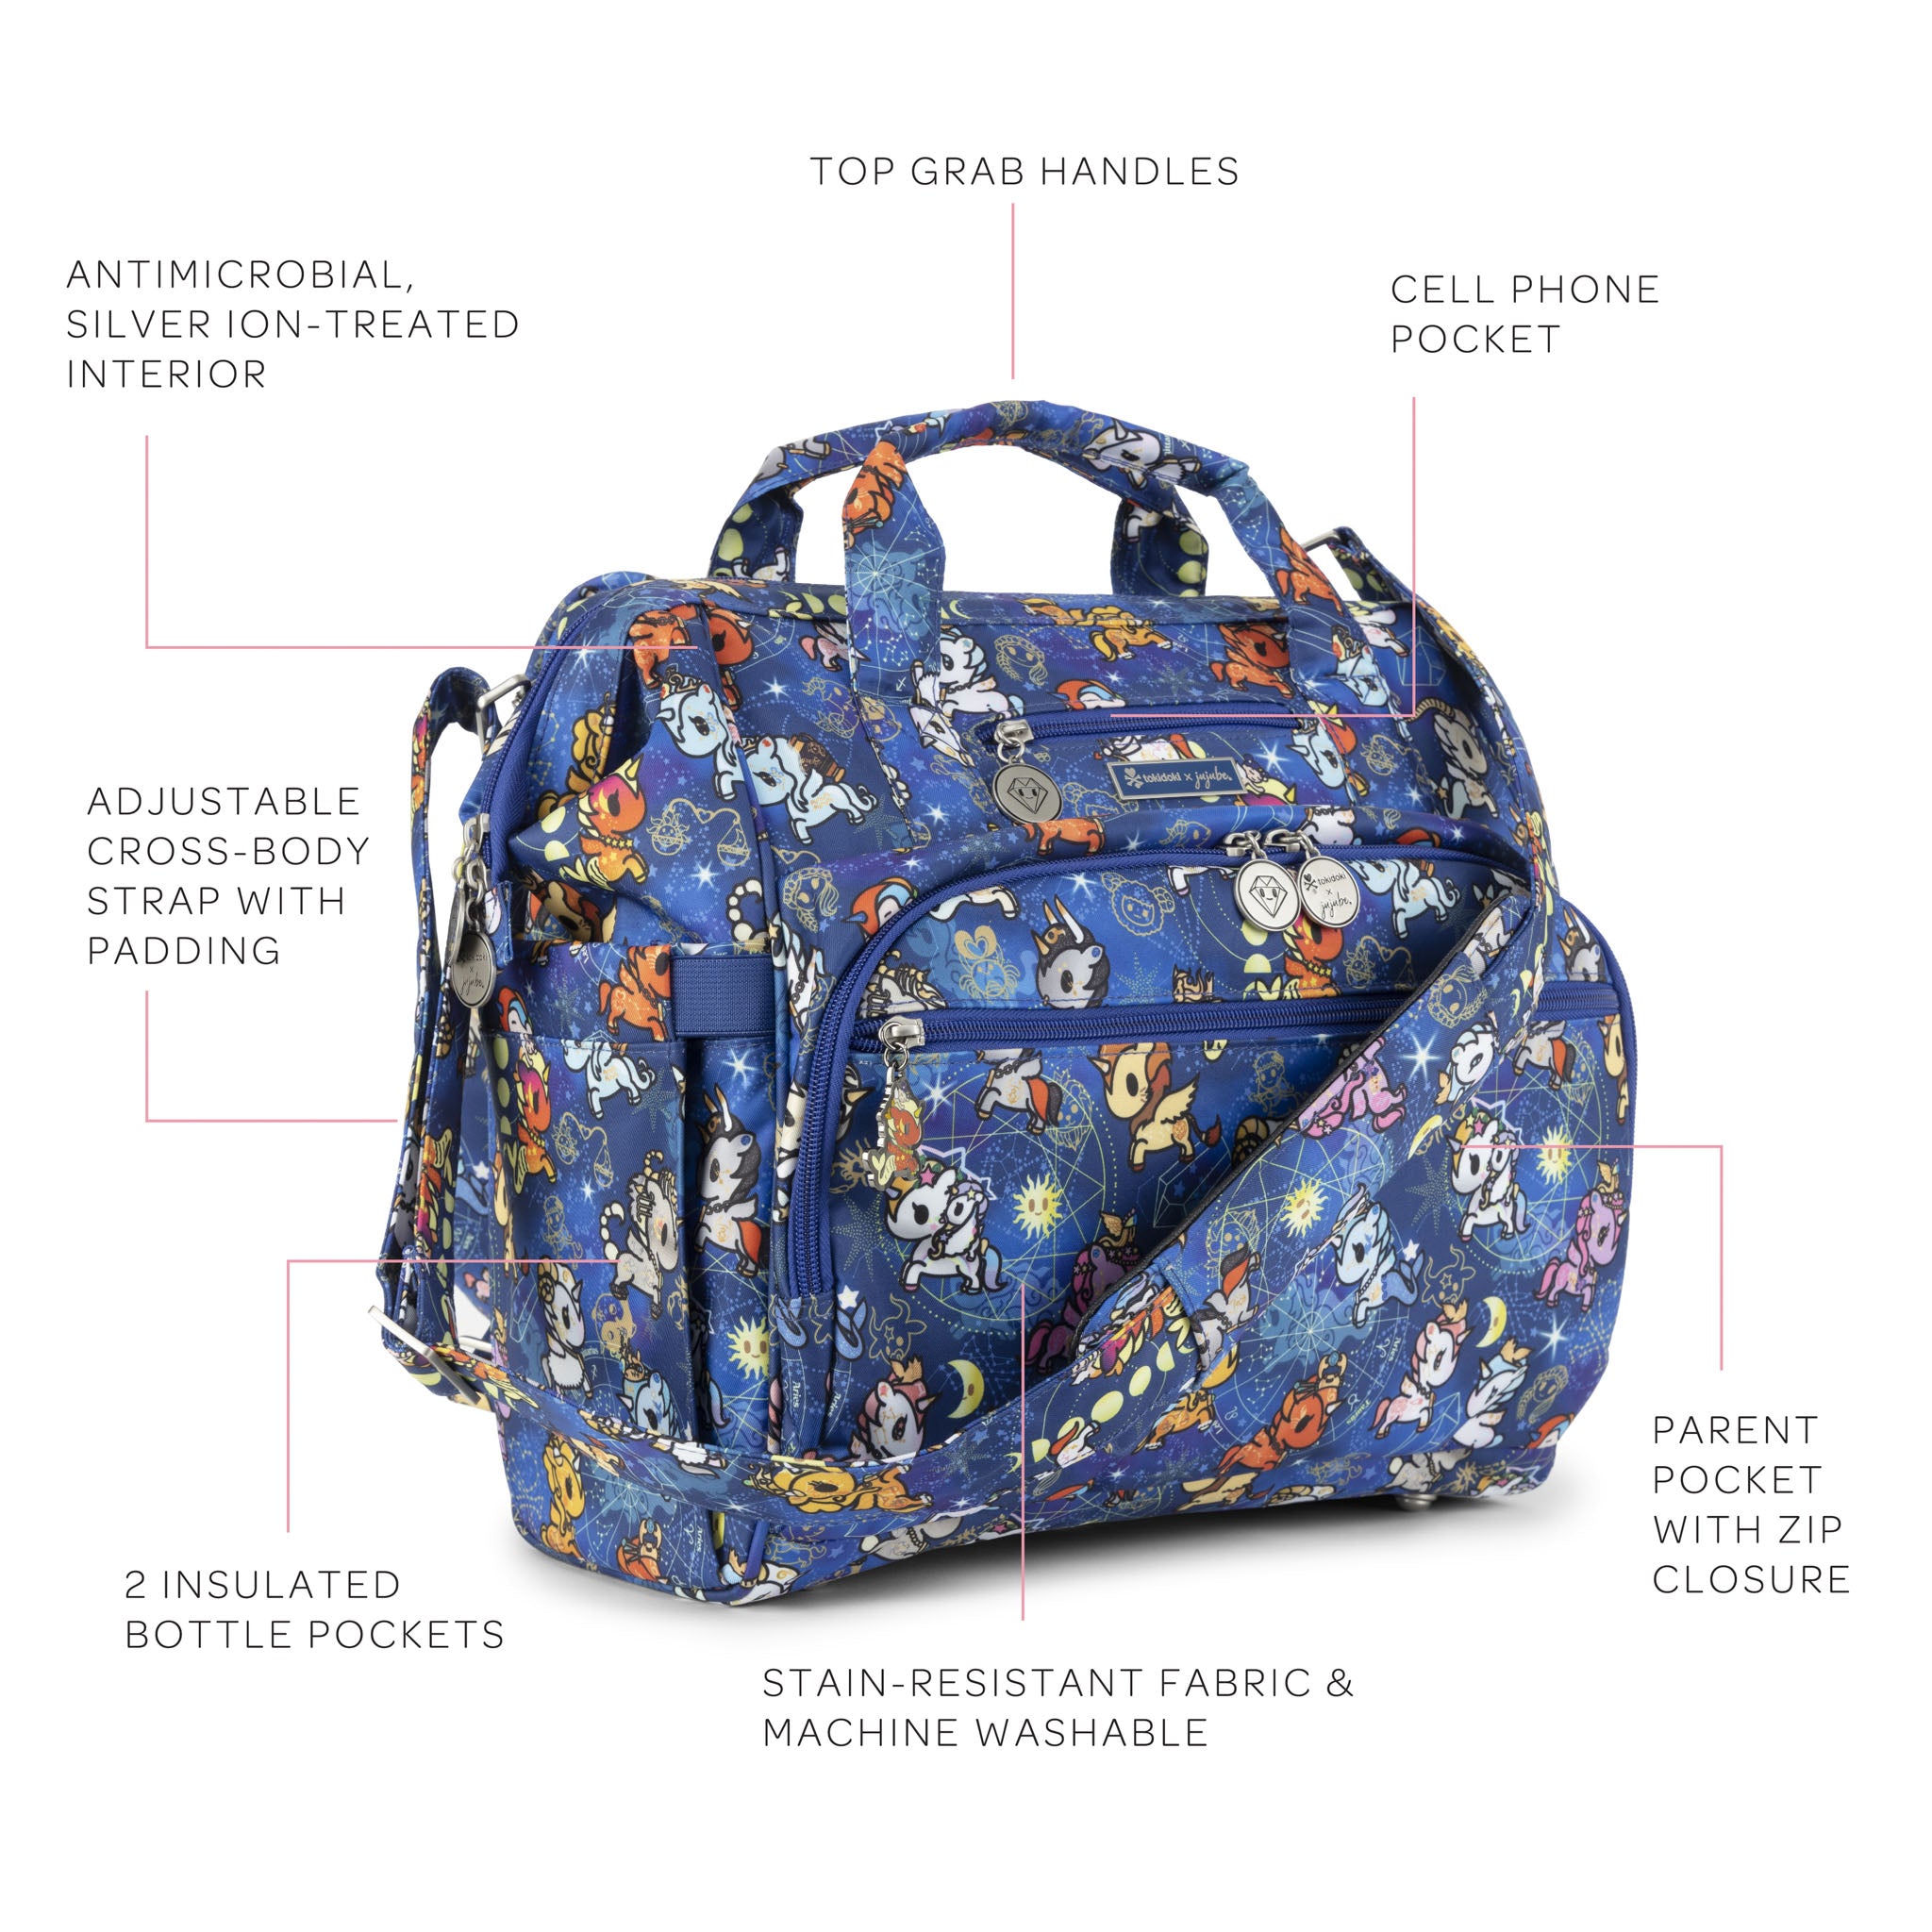 This image showcases the specs and features of the Dr. B.F.F. diaper bag, which features the colorful design of Kawaii Princess Warriors against a gradient blue background.